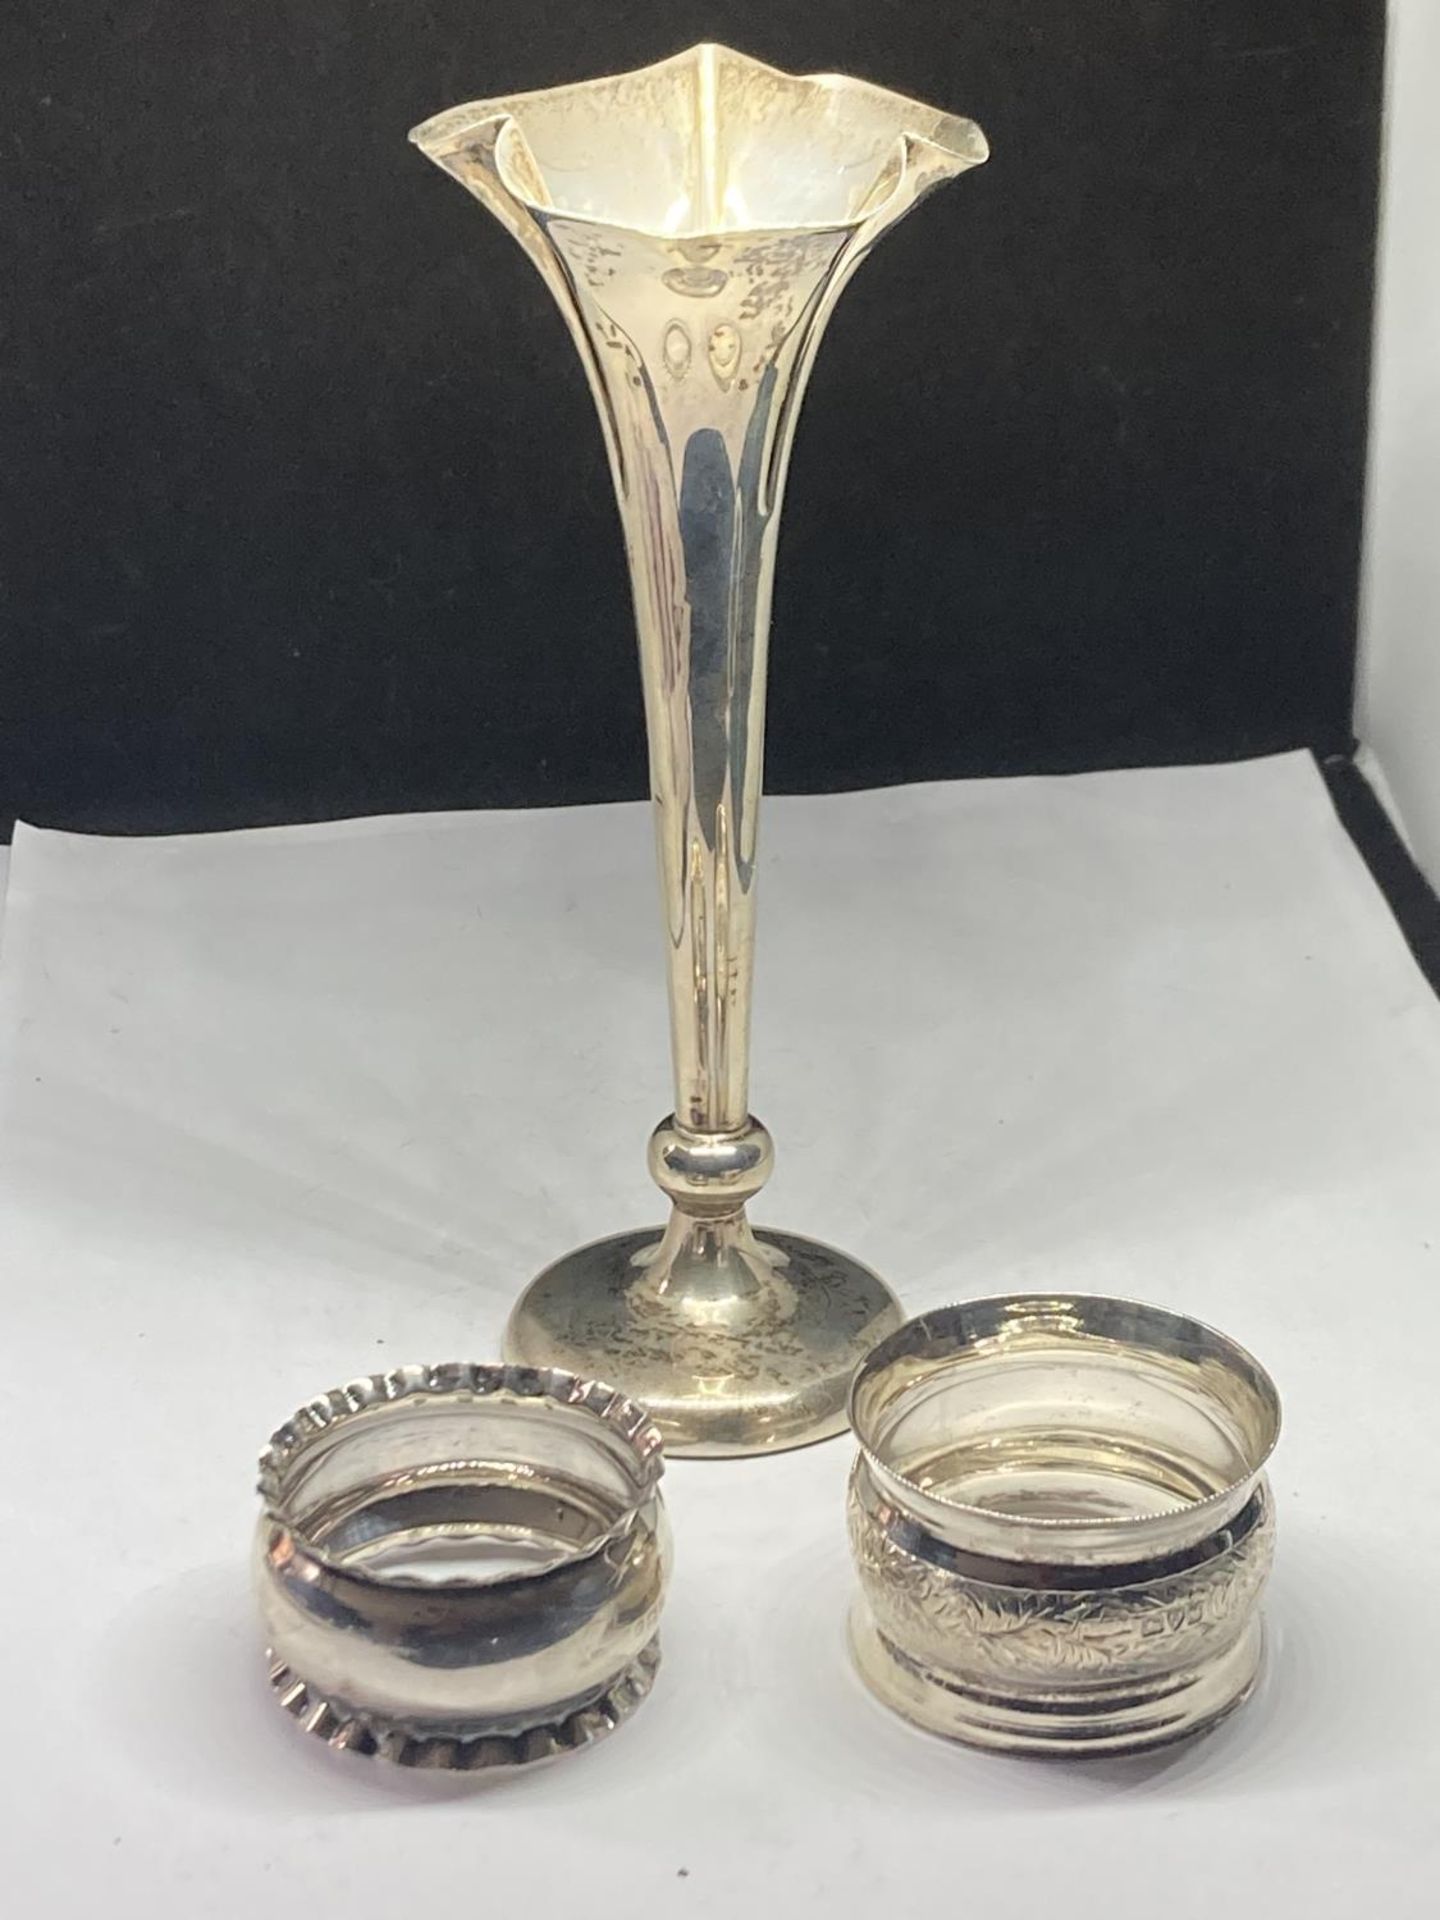 THREE HALLMARKED SILVER ITEMS TO INCLUDE A LONDON WEIGHTED BUD VASE, A CHESTER NAPKIN RING AND A